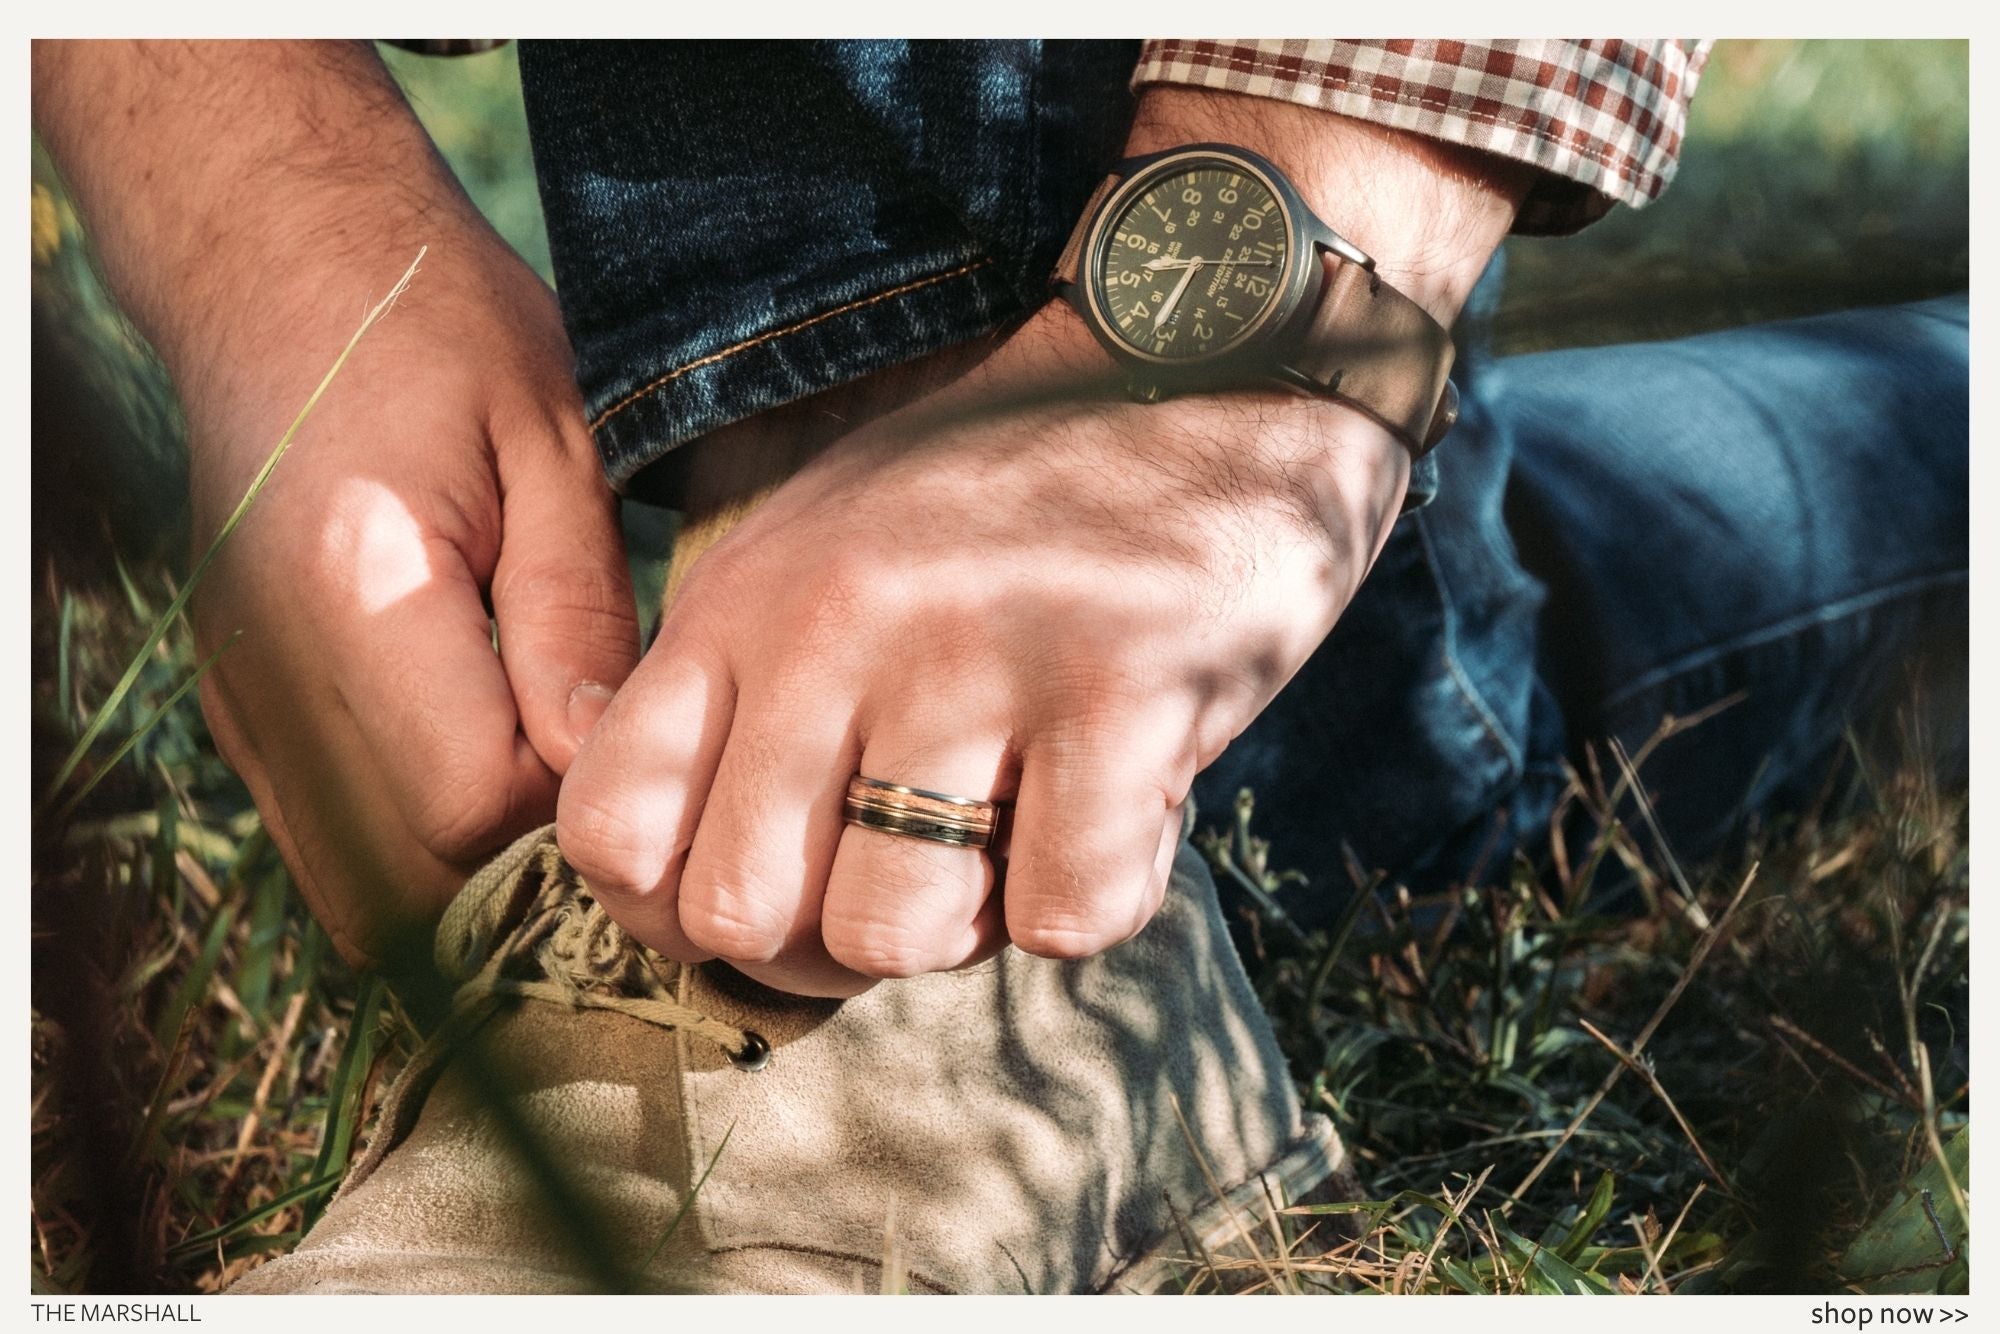 our-favorite-rugged-rustic-wedding-bands-for-him-mens-titanium-wedding-band-whiskey-barrel-wood-guitar-string-mesquite-wood-rustic-and-main-rings